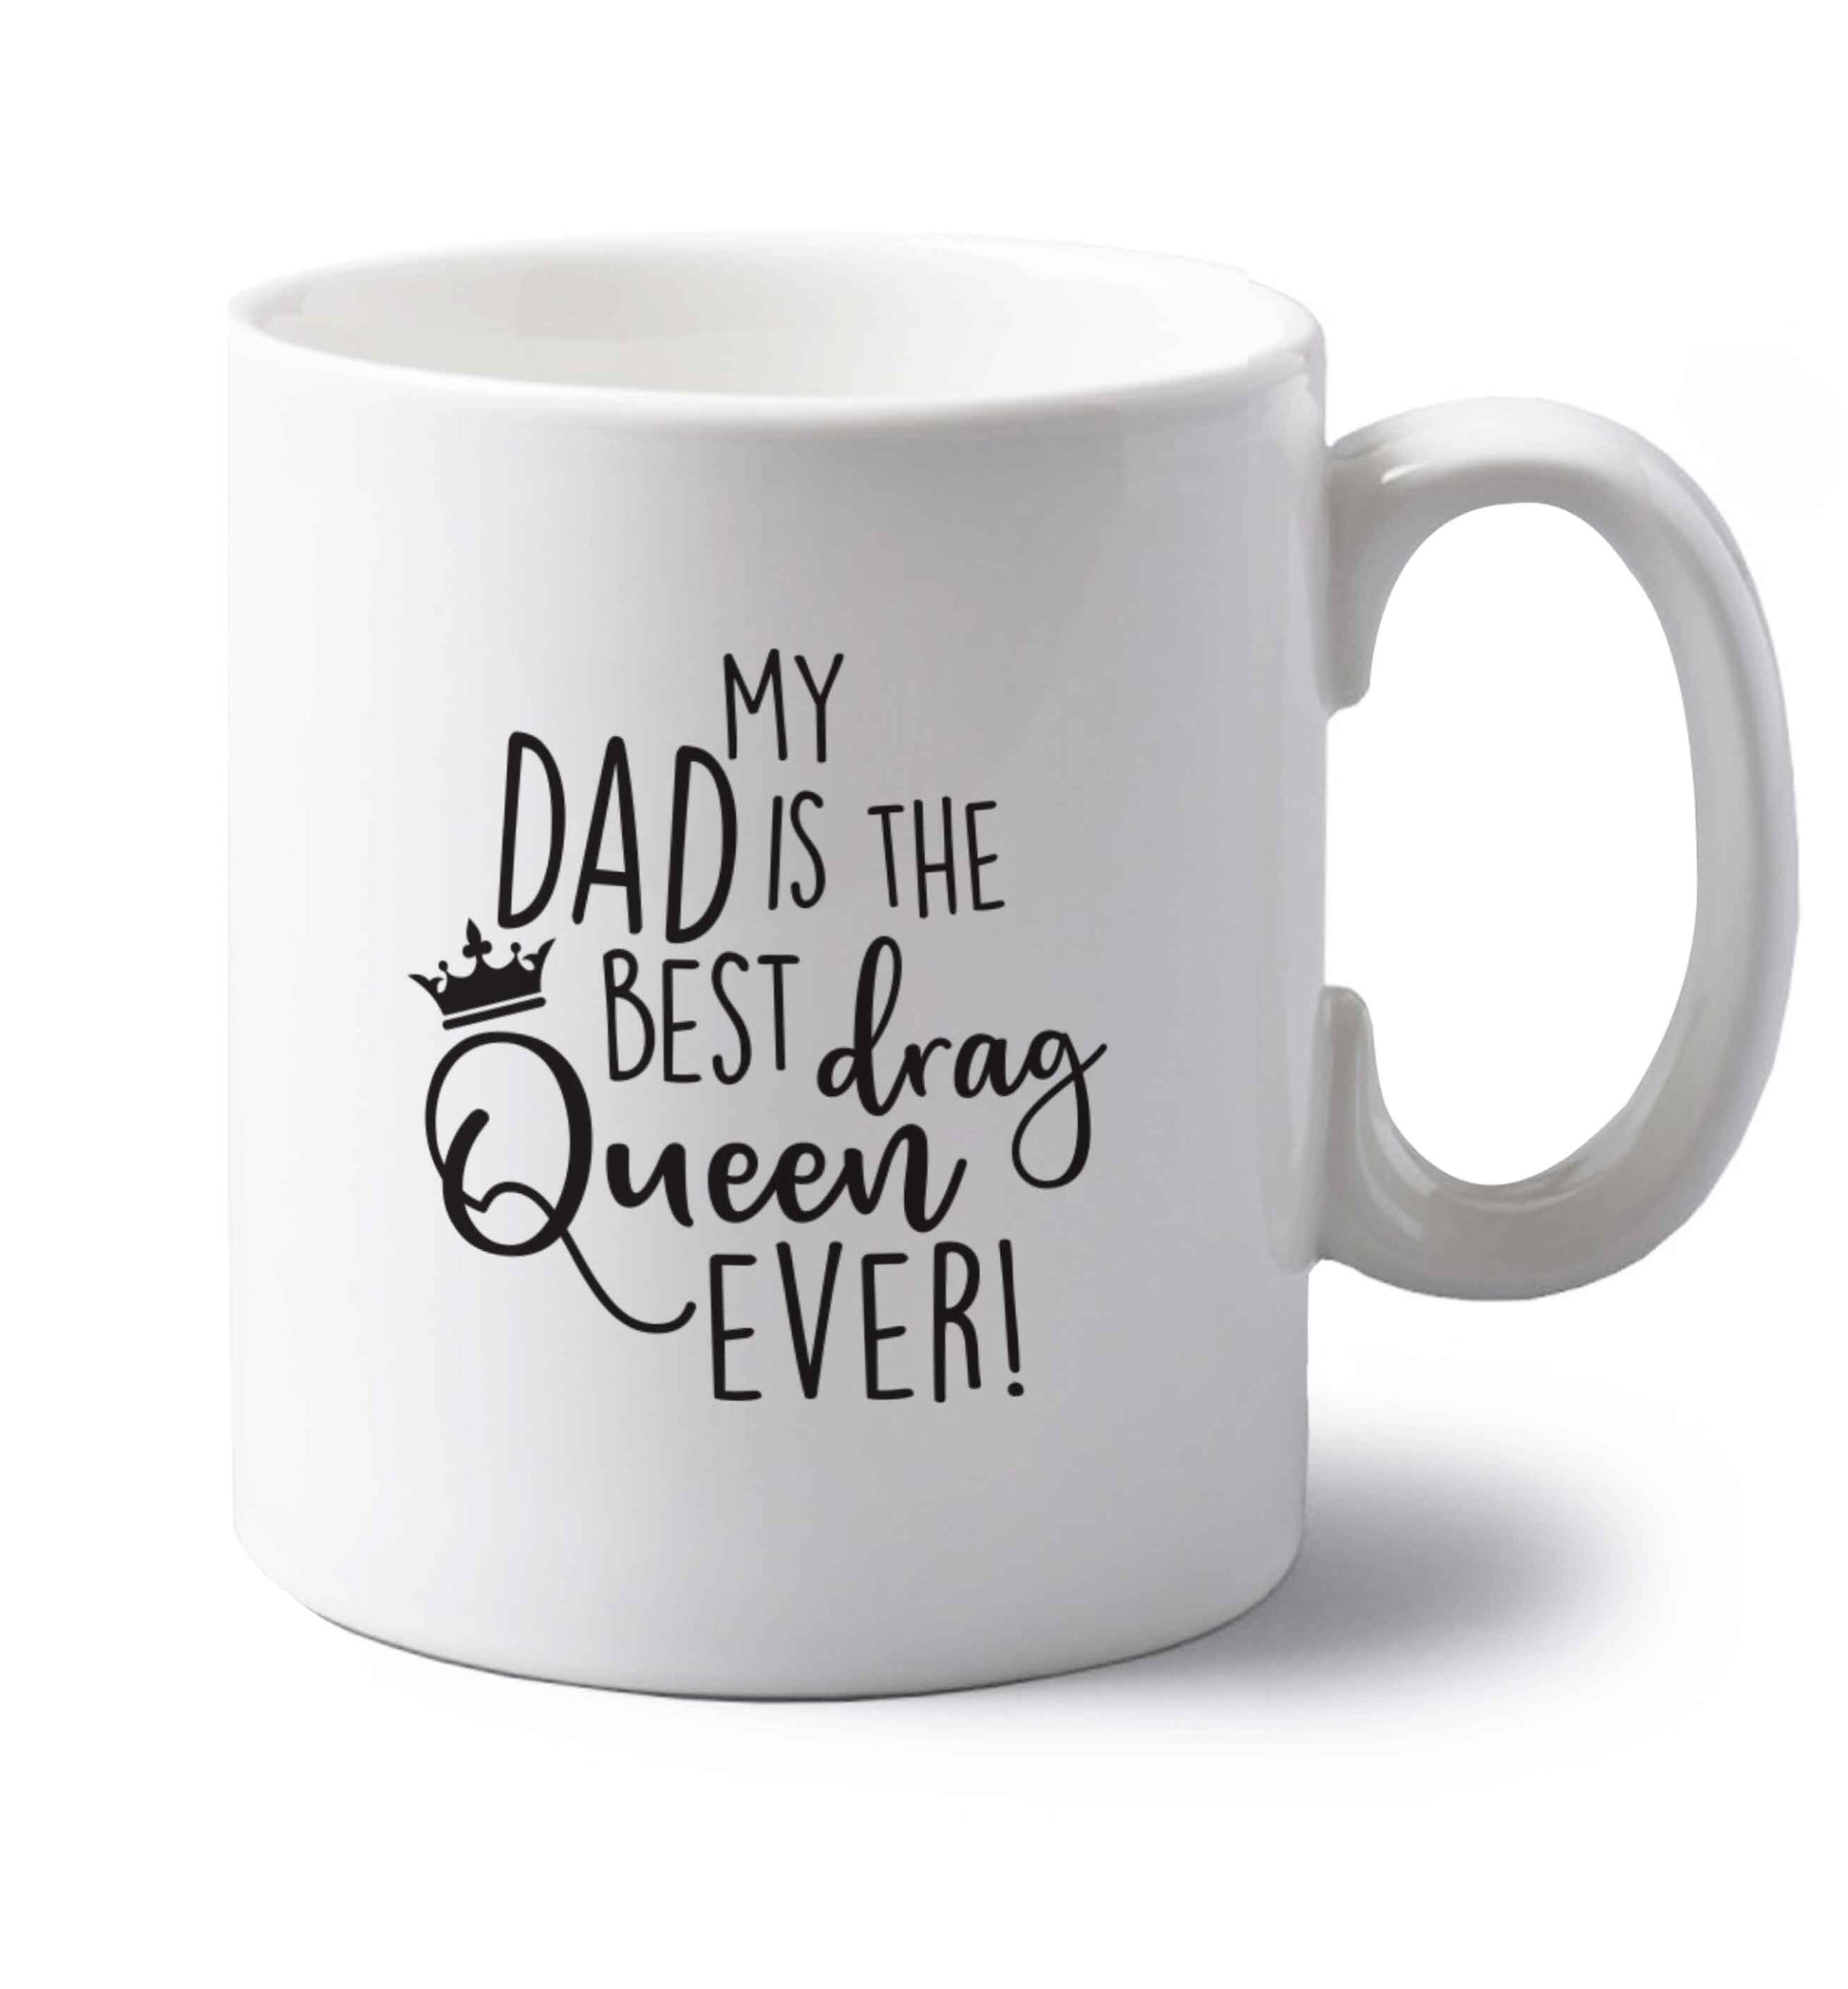 My dad is the best drag Queen ever left handed white ceramic mug 